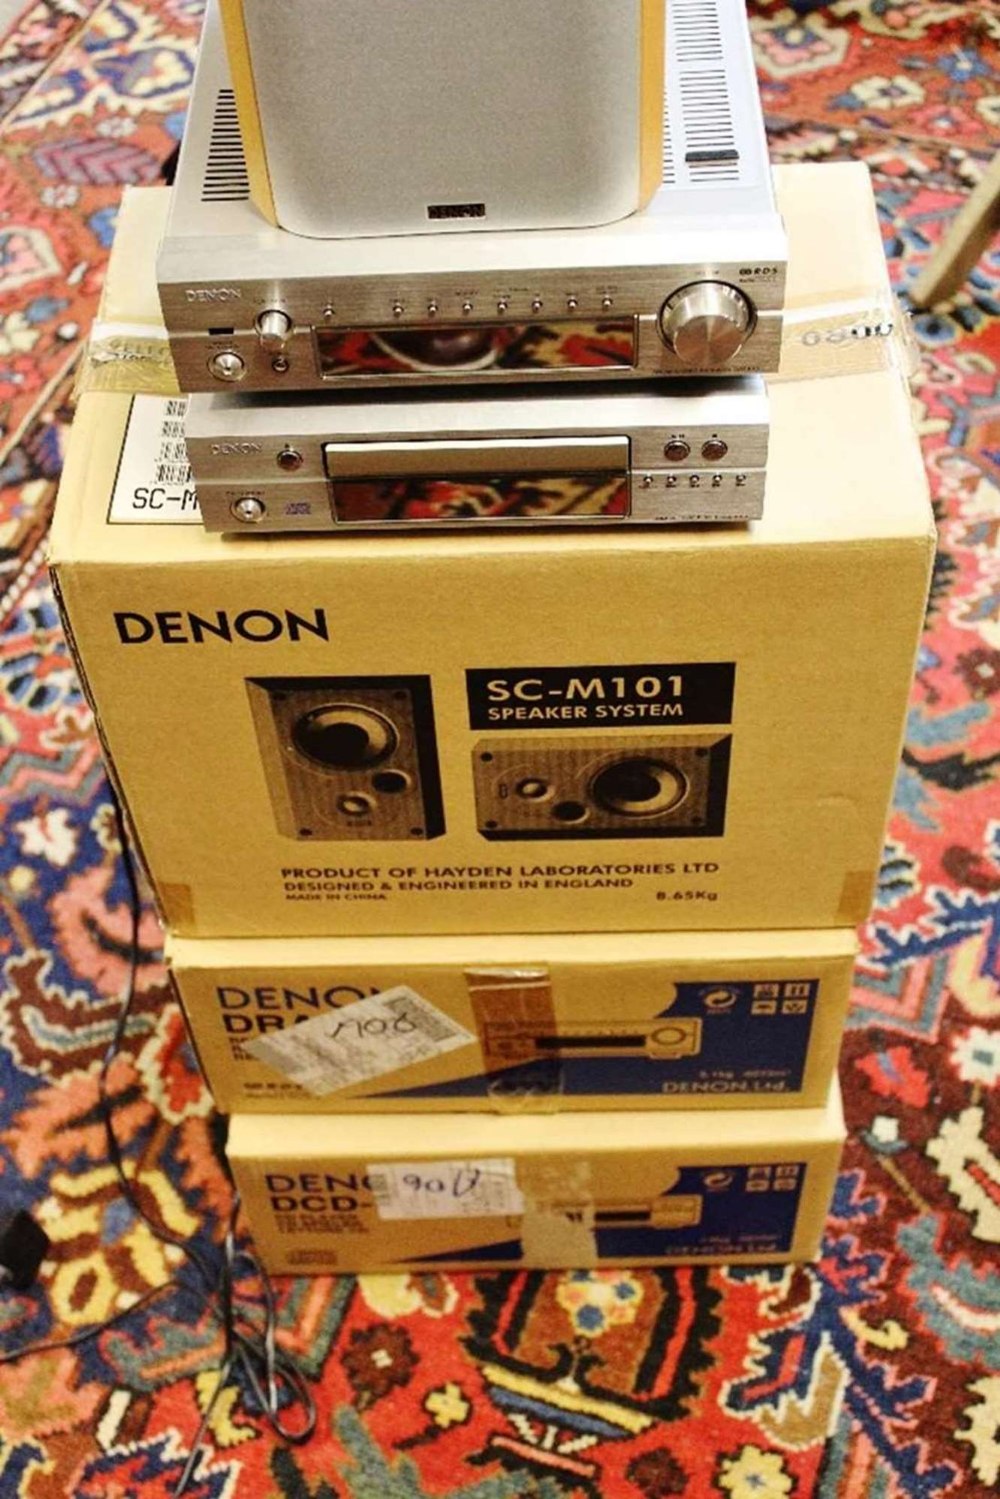 Denon Stereo System Including Speakers-Original Packing Included - Image 2 of 5